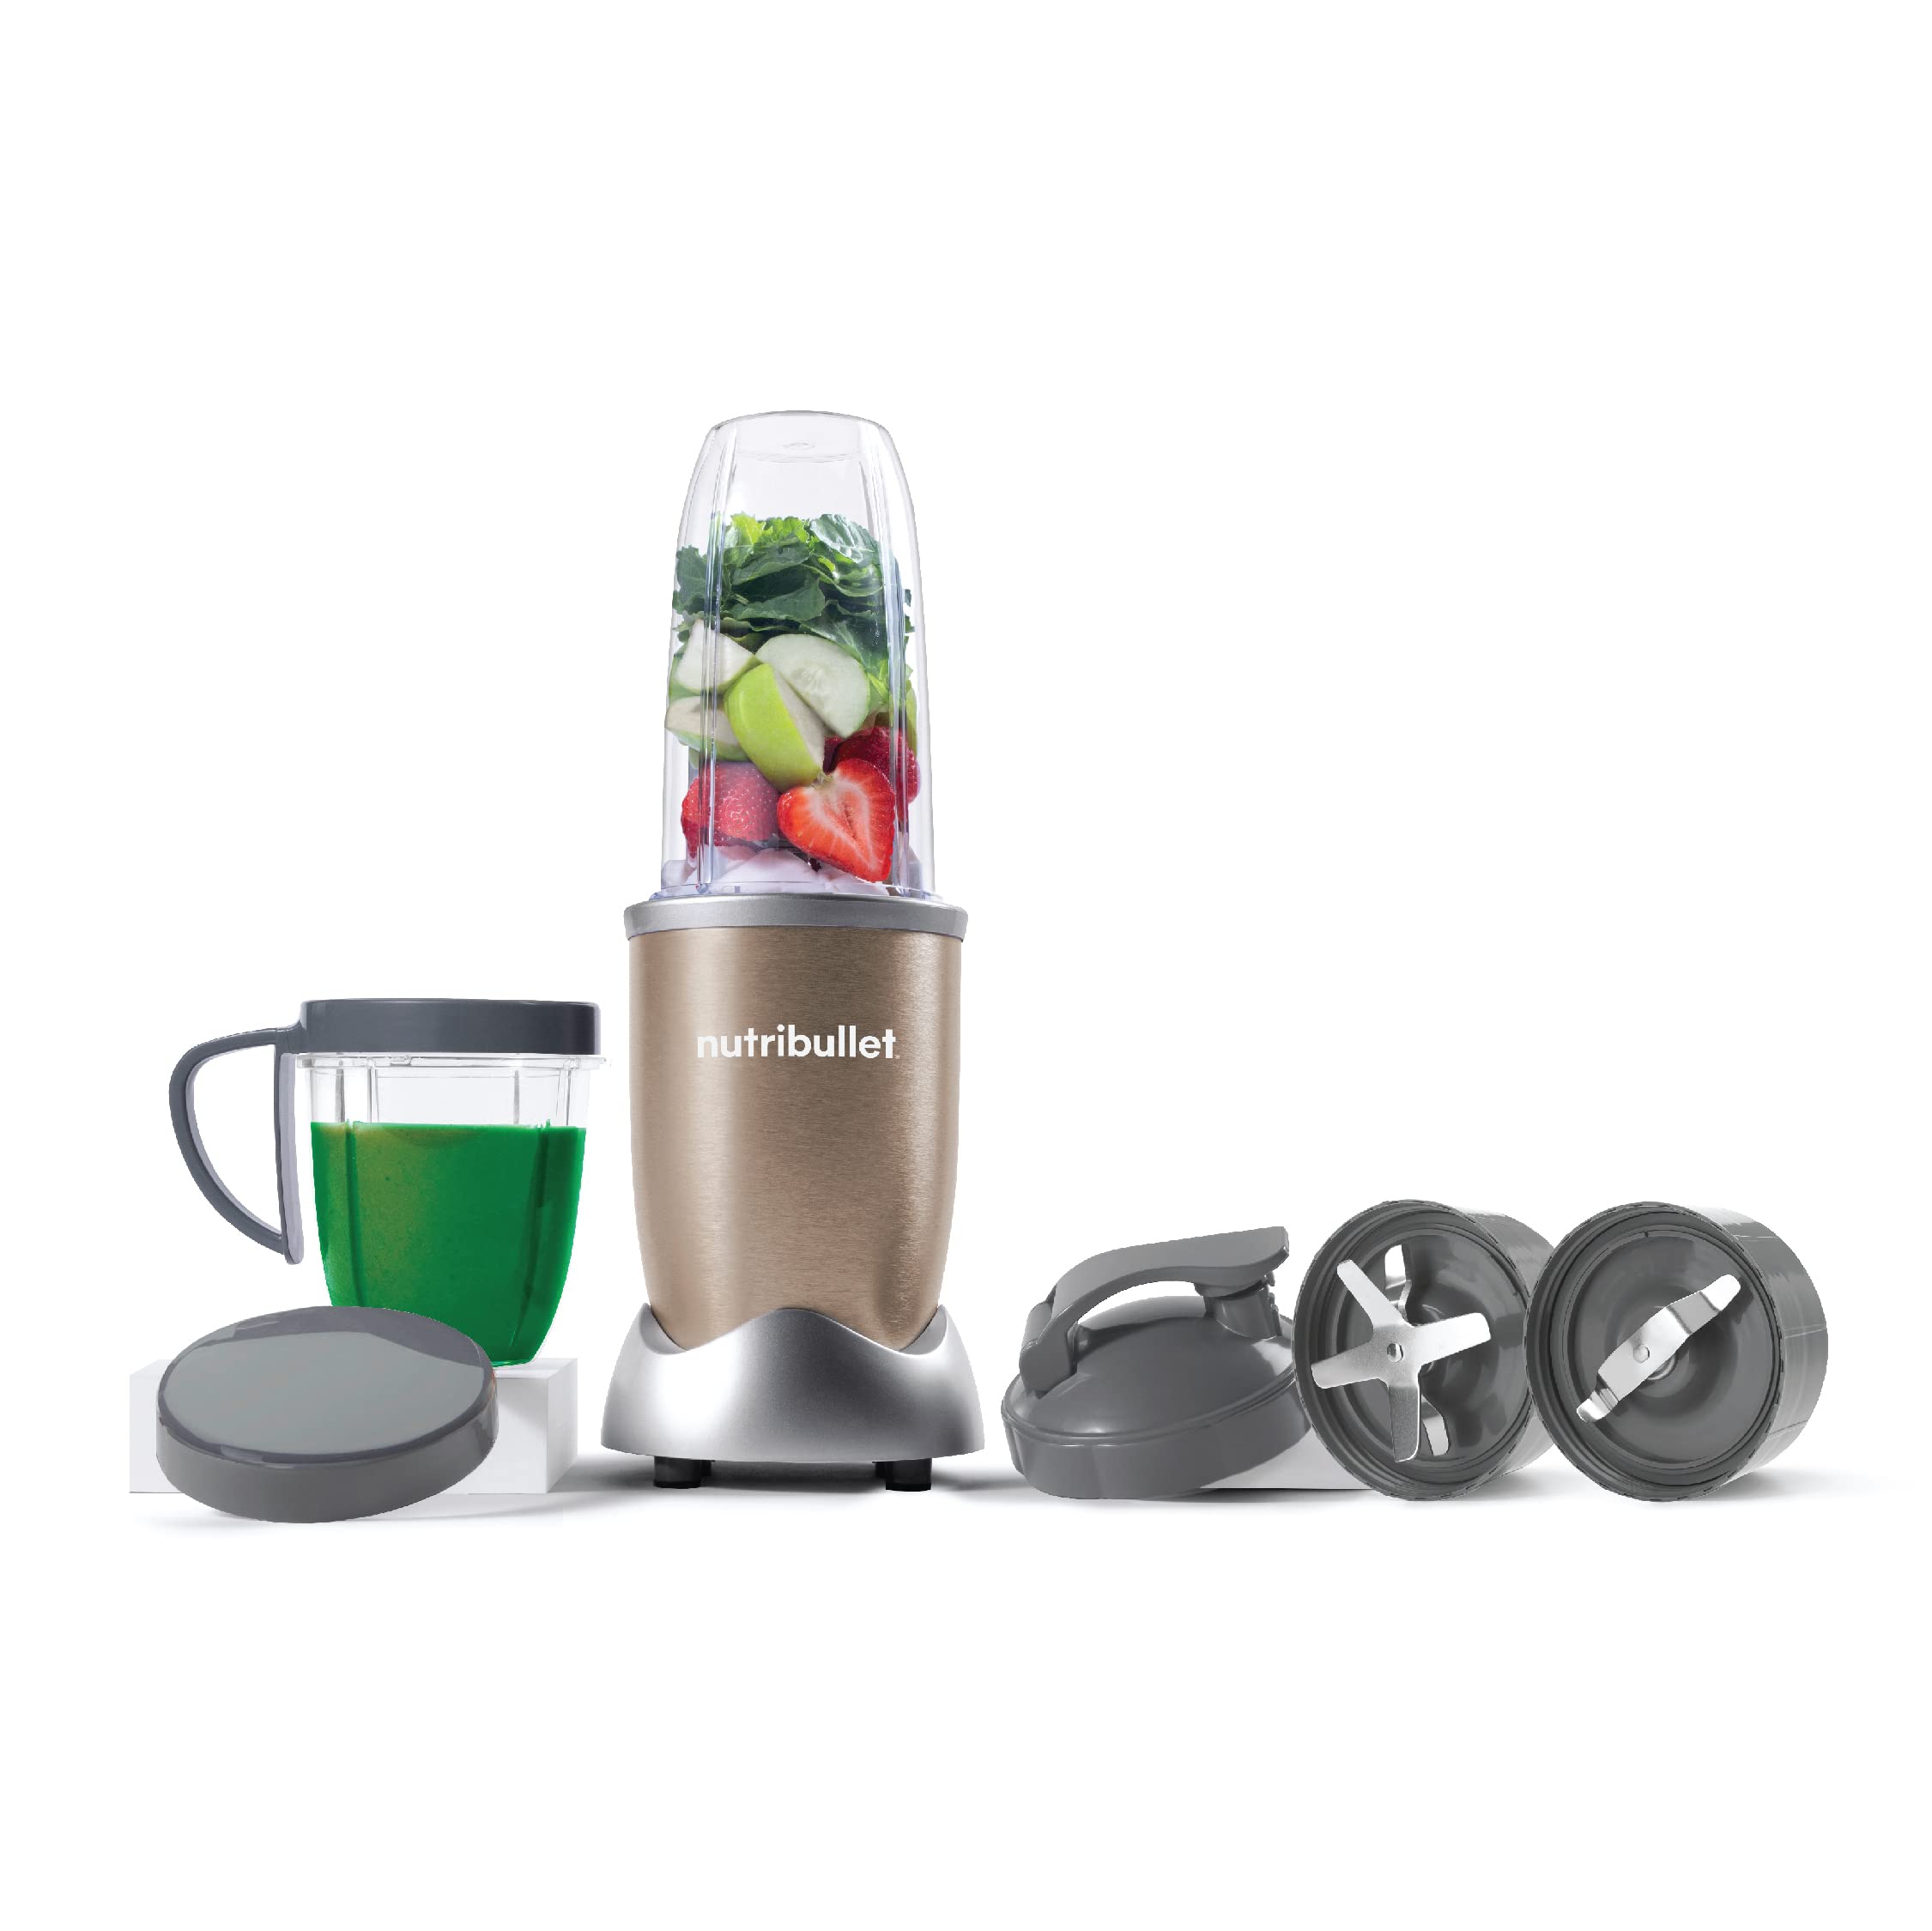 Nutribullet 900 Watts, 7pc Accessories, Multi-Function High Speed Blender, Mixer System With Nutrient Extractor, Smoothie Maker, Copper Gold 1 year warranty